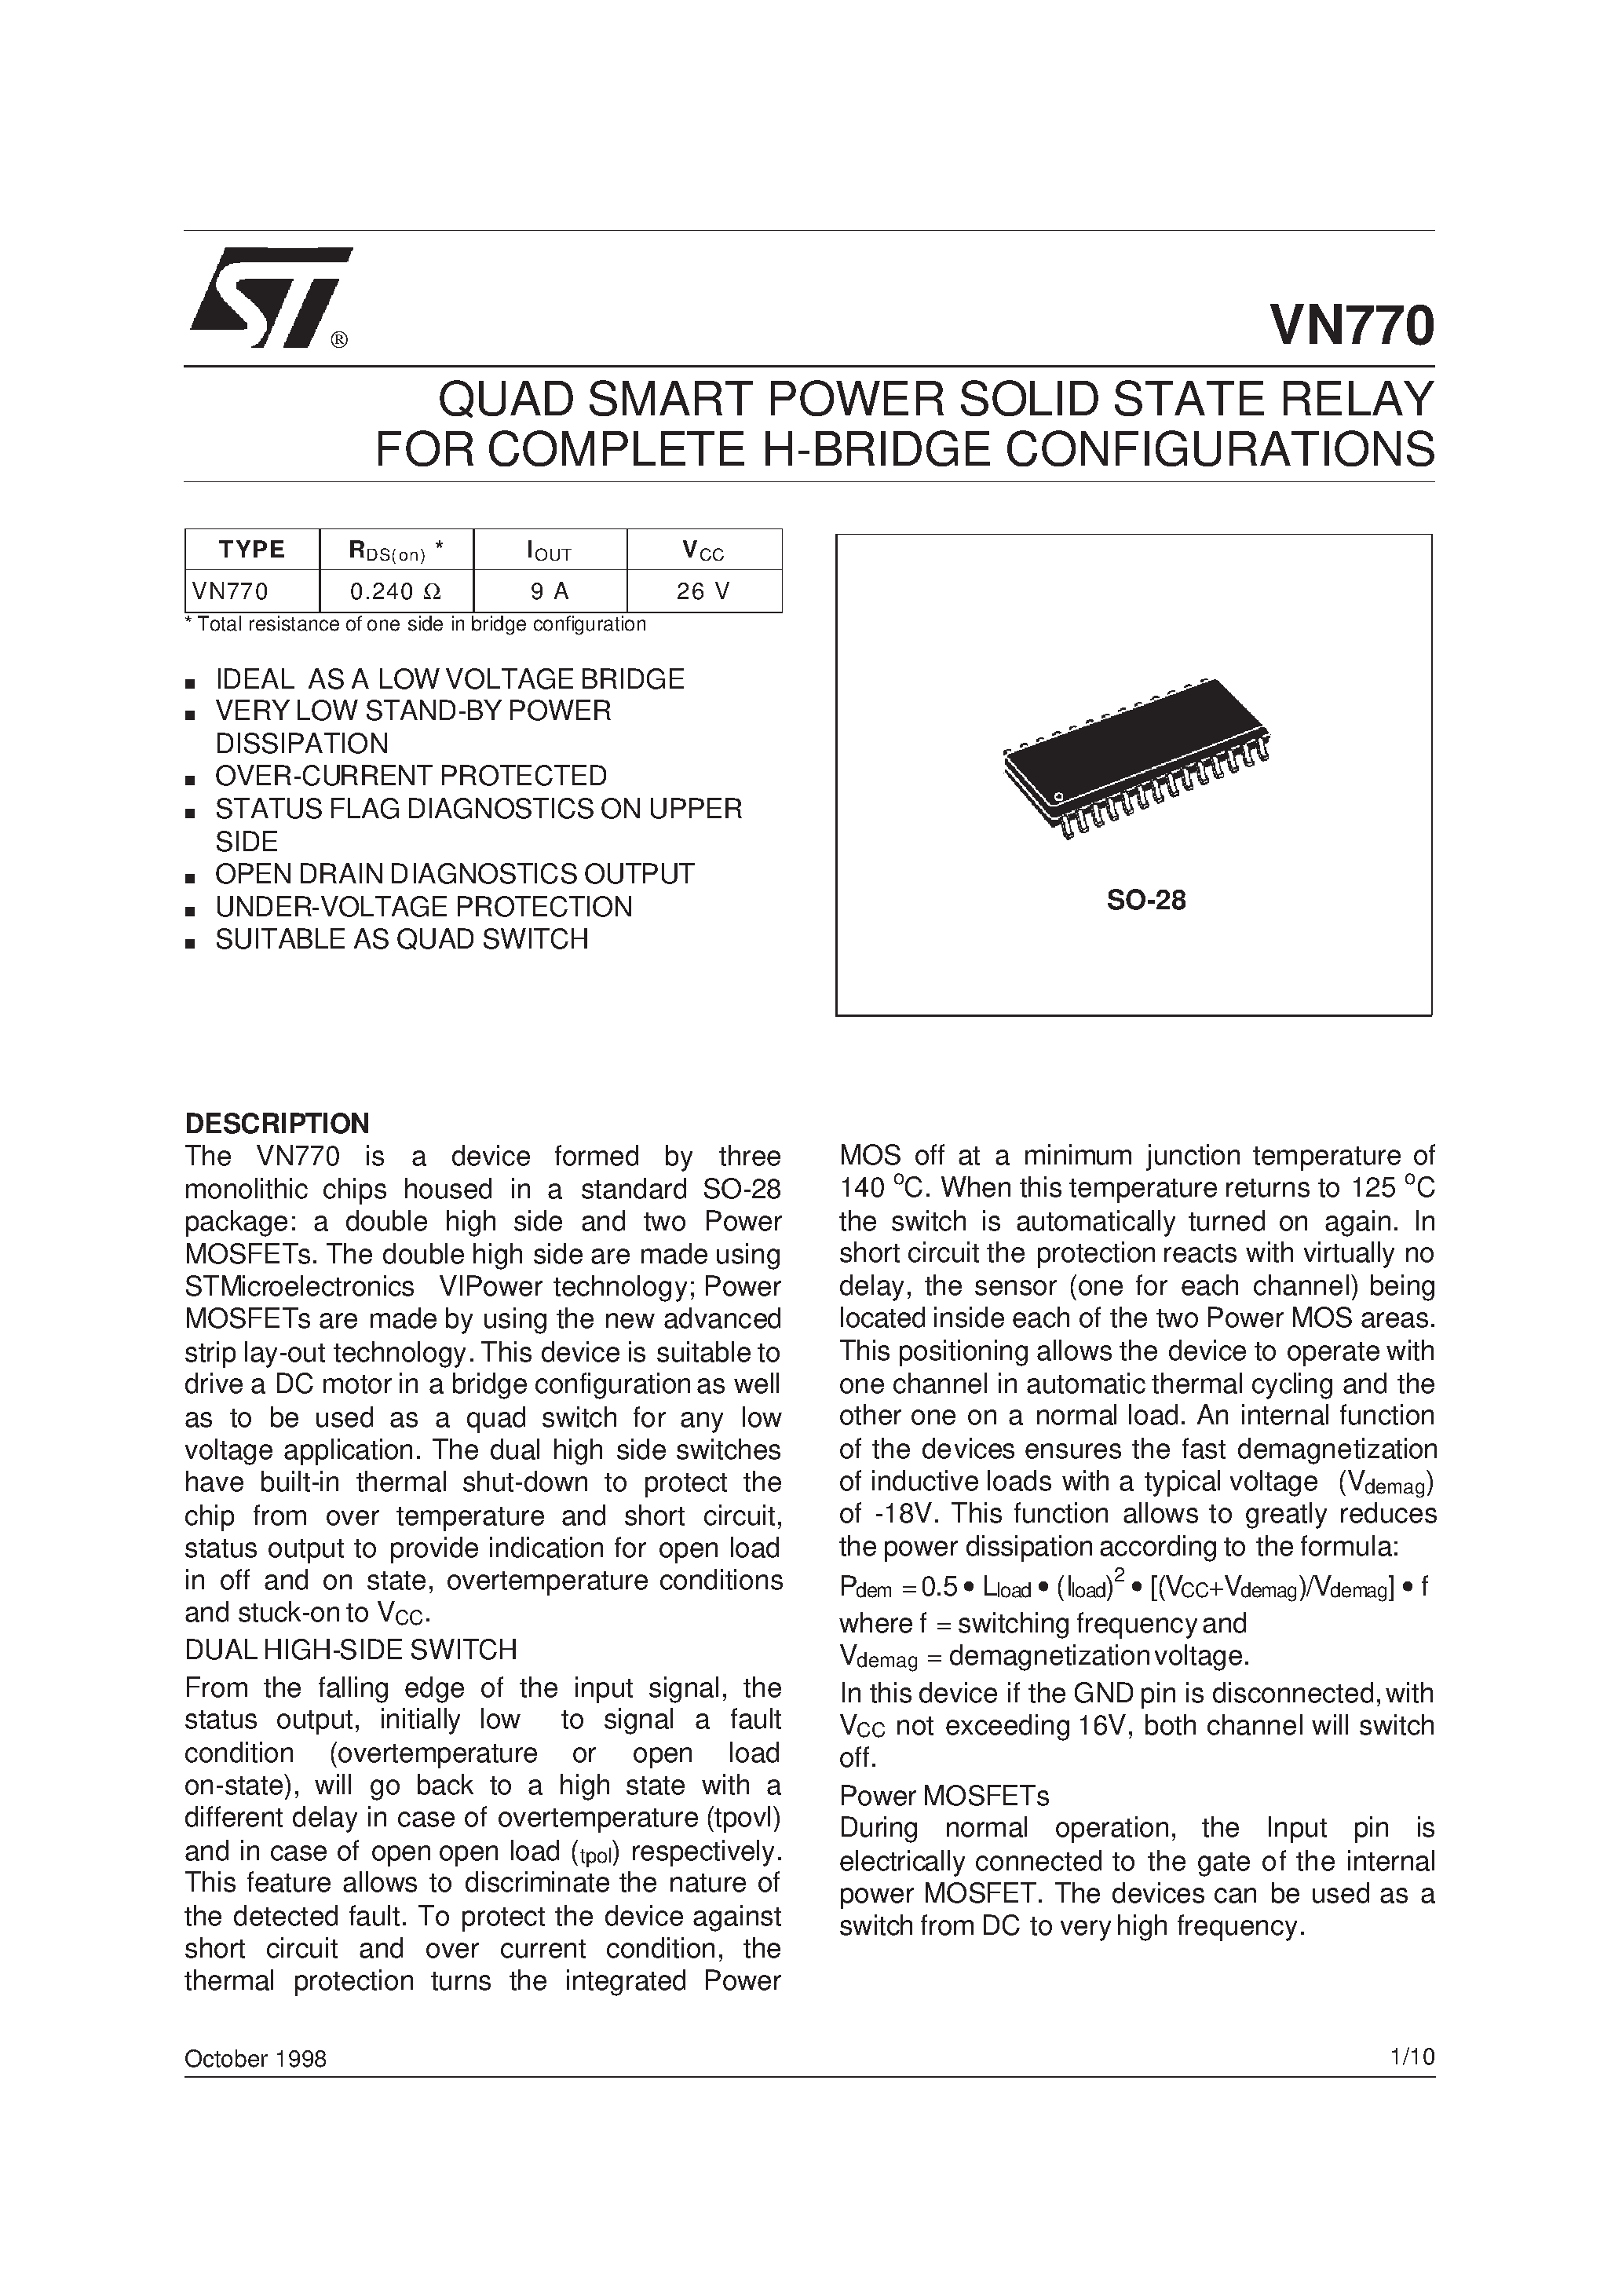 Datasheet VN770 - QUAD SMART POWER SOLID STATE RELAY FOR COMPLETE H-BRIDGE CONFIGURATIONS page 1